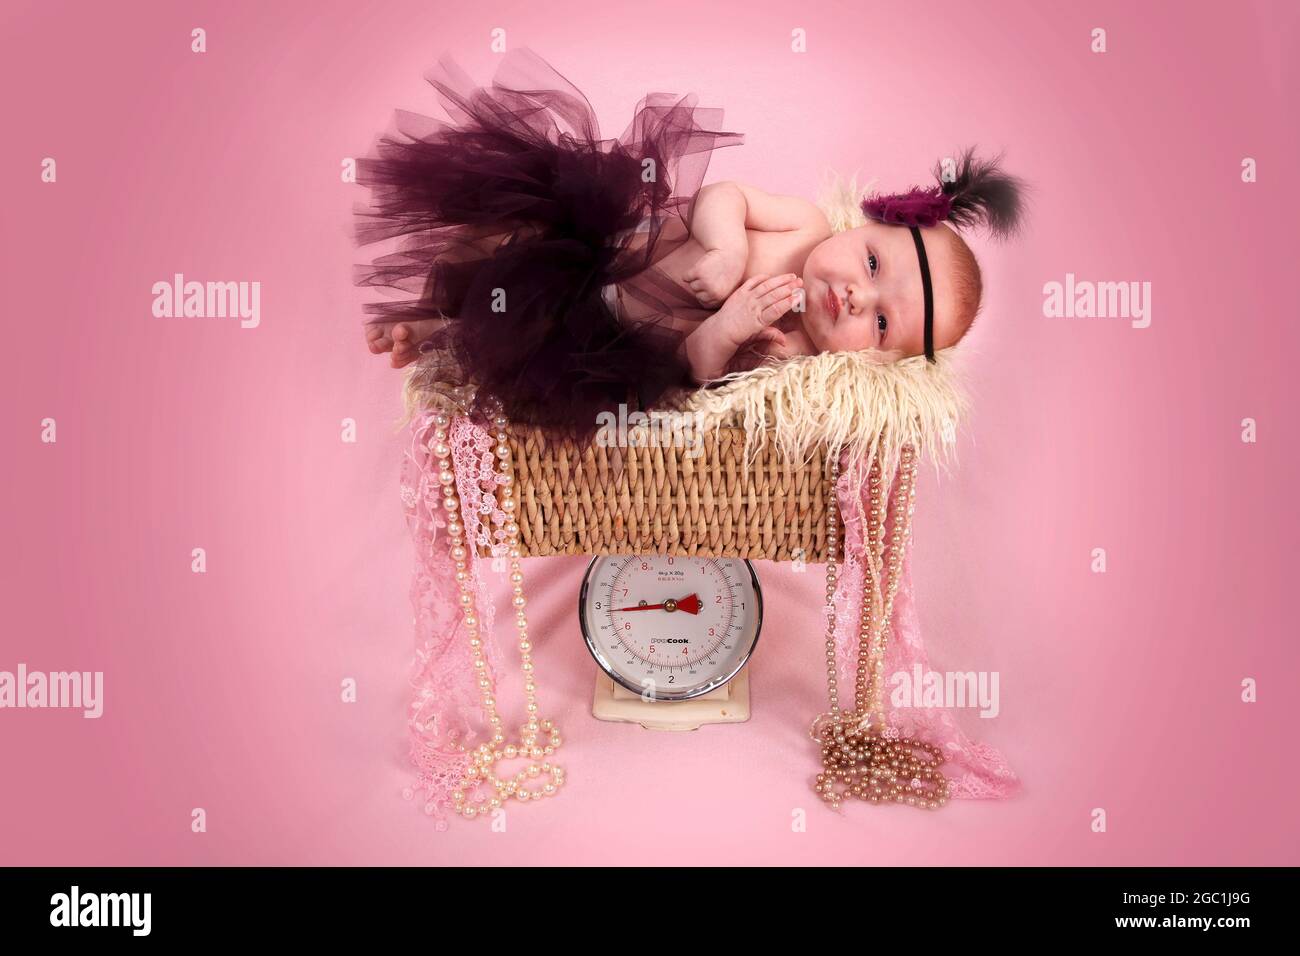 new born baby girl in scales Stock Photo